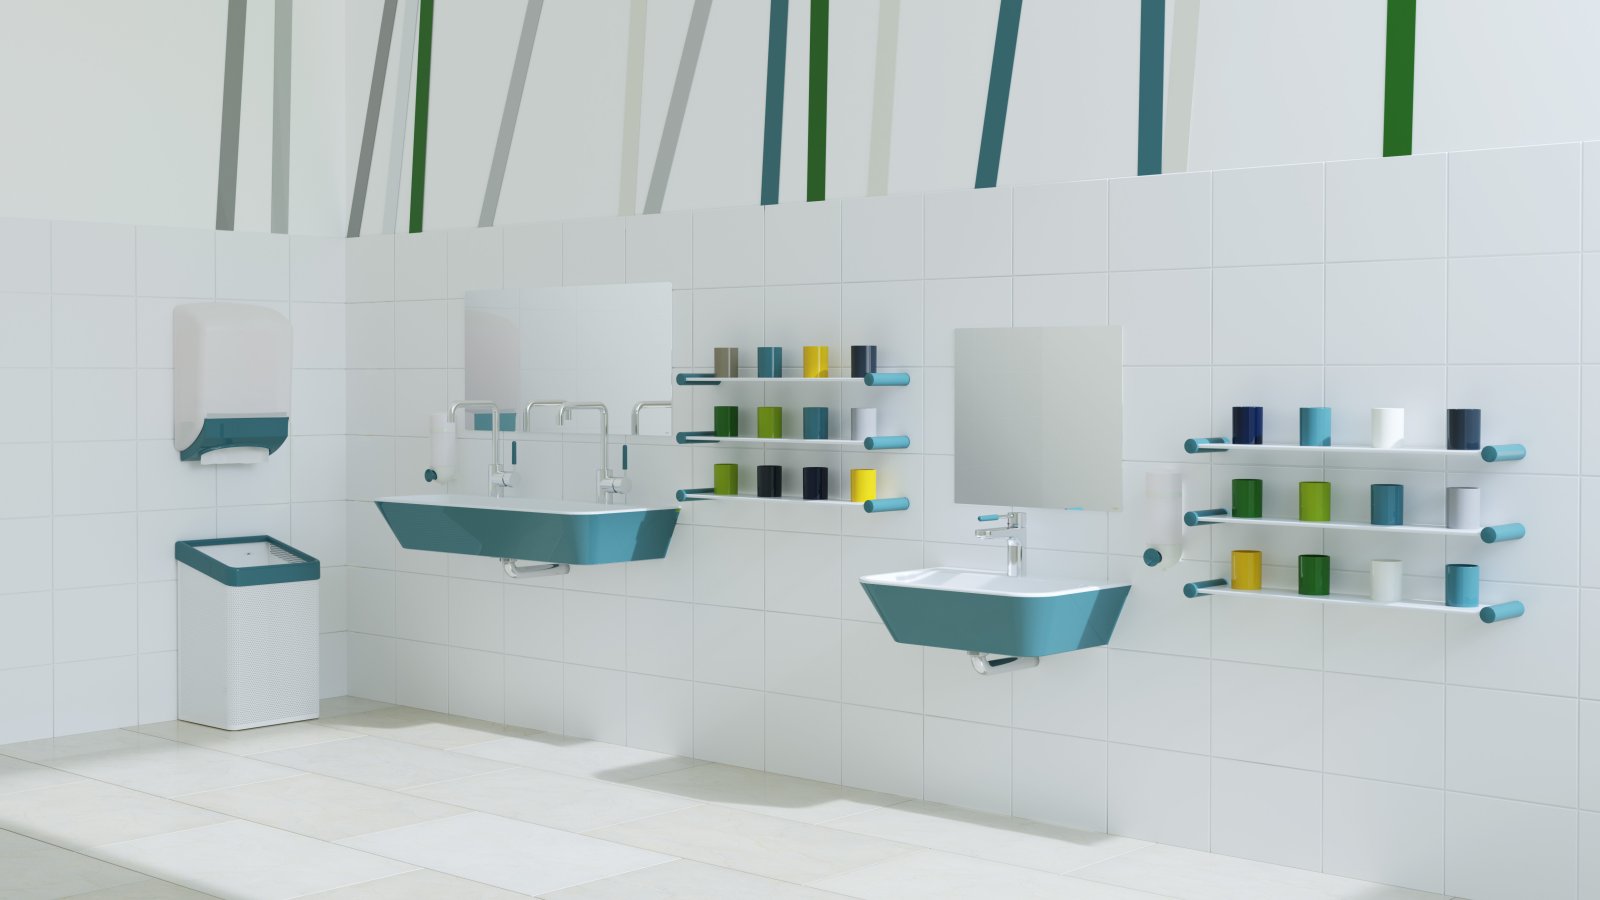 Two washbasins at different heights next to colourful toothbrush mugs